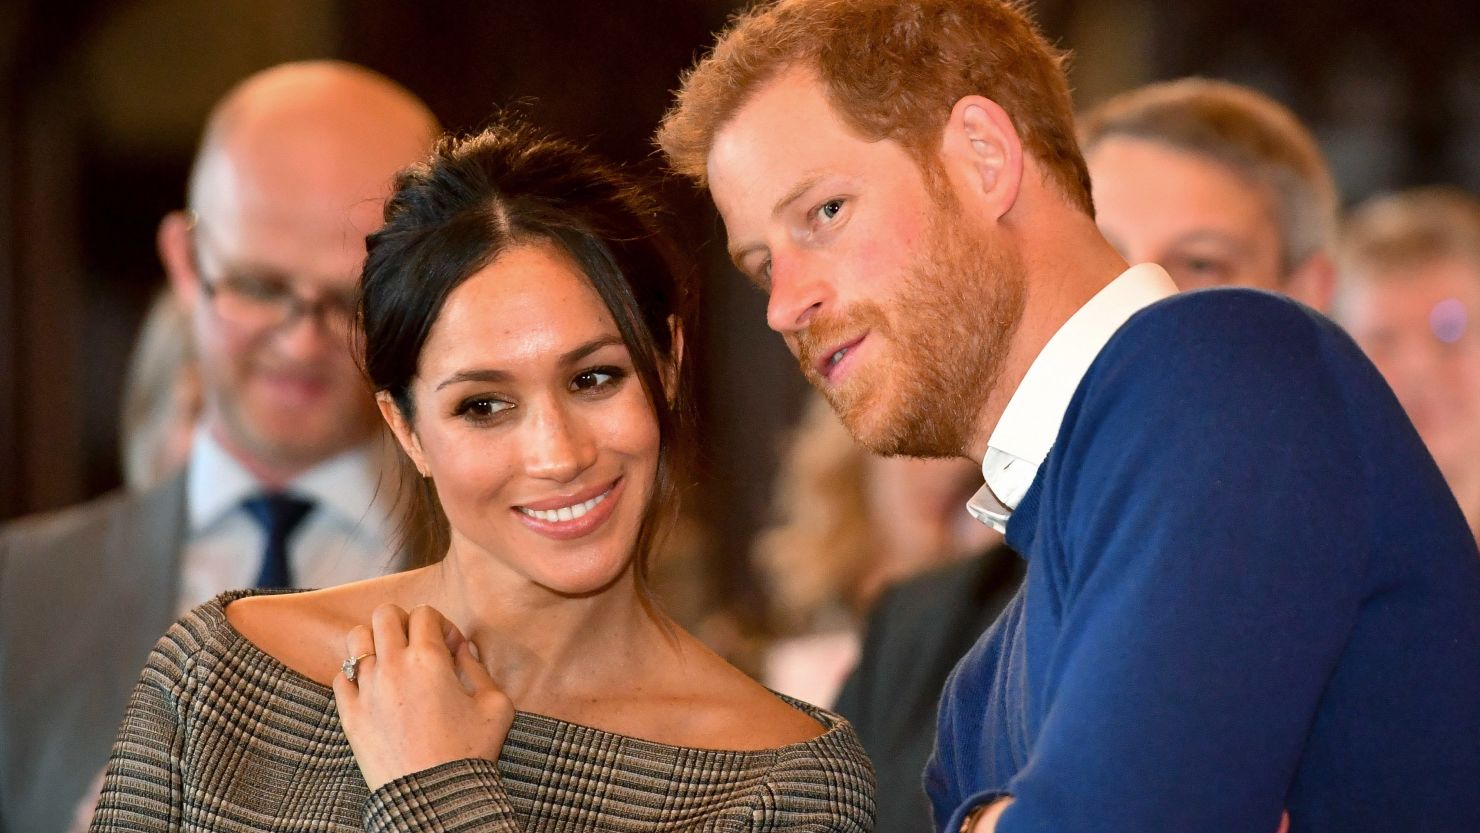 Prince Harry whispers to Meghan Markle as they watch a dance performance in Cardiff, Wales, in January.